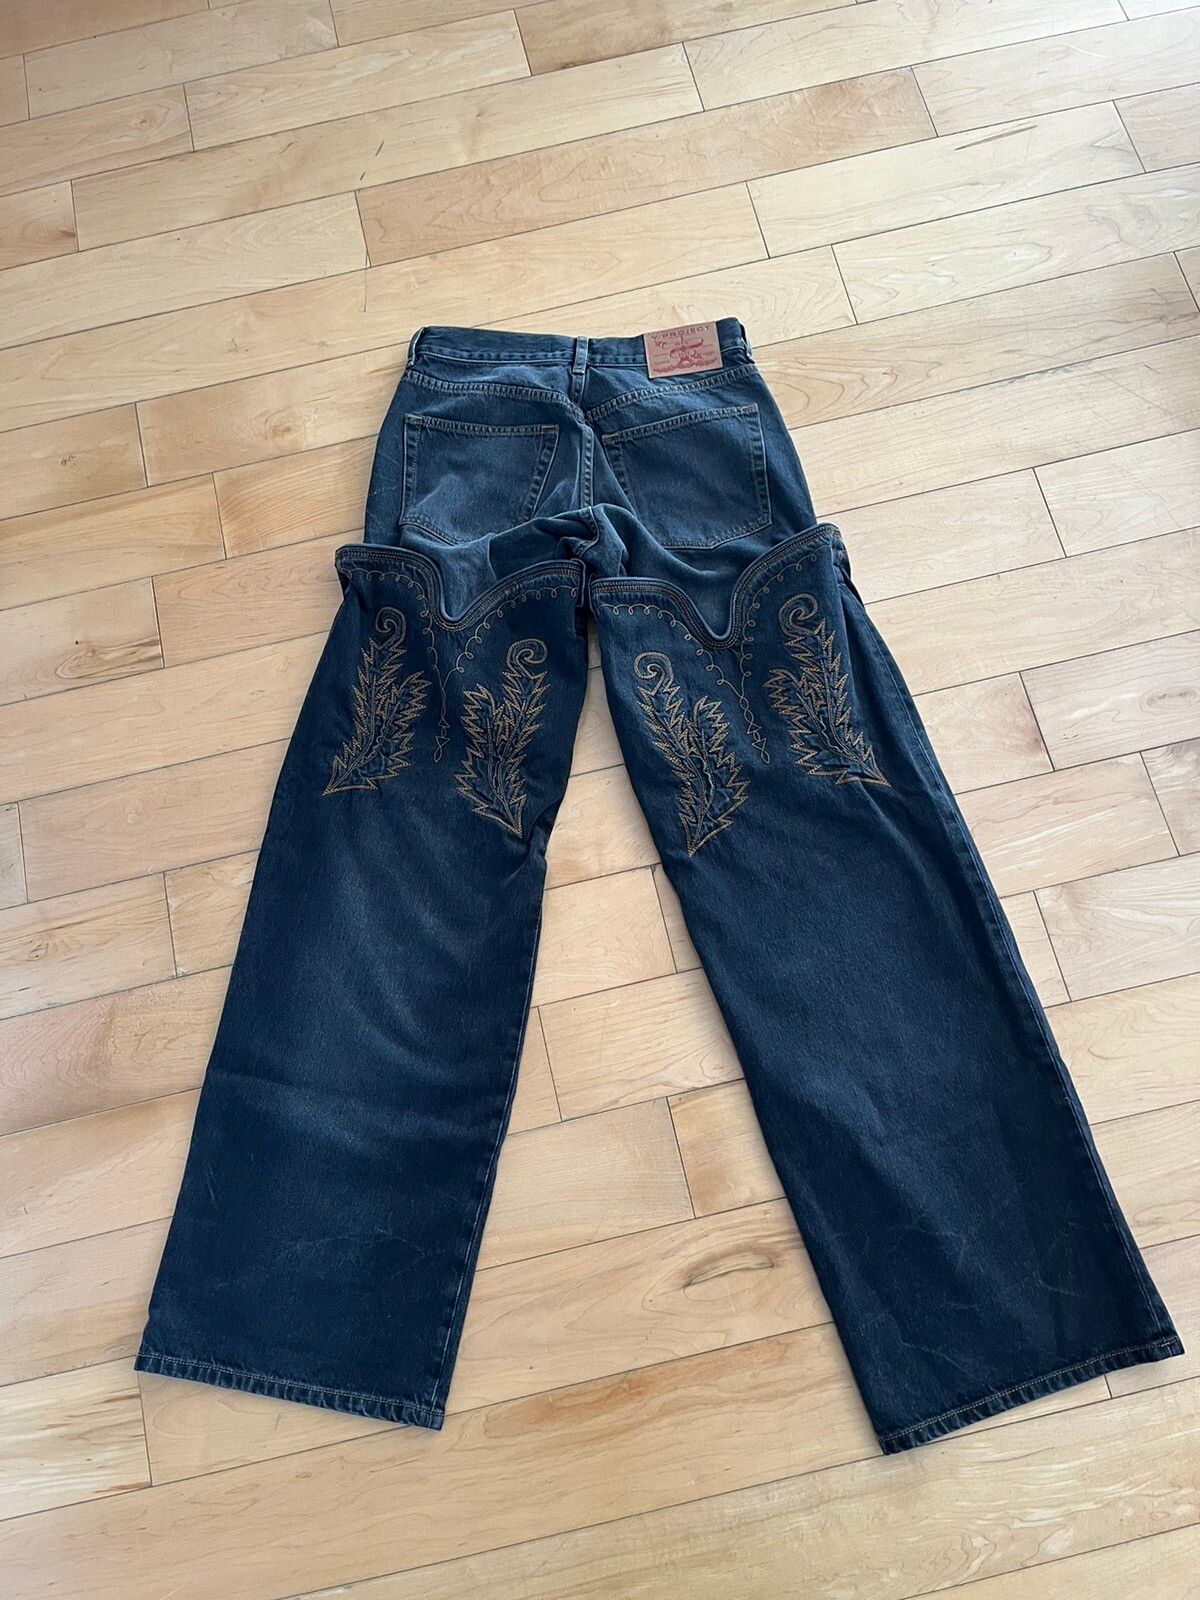 NWT - Y/PROJECT High Cowboy Jeans - 2